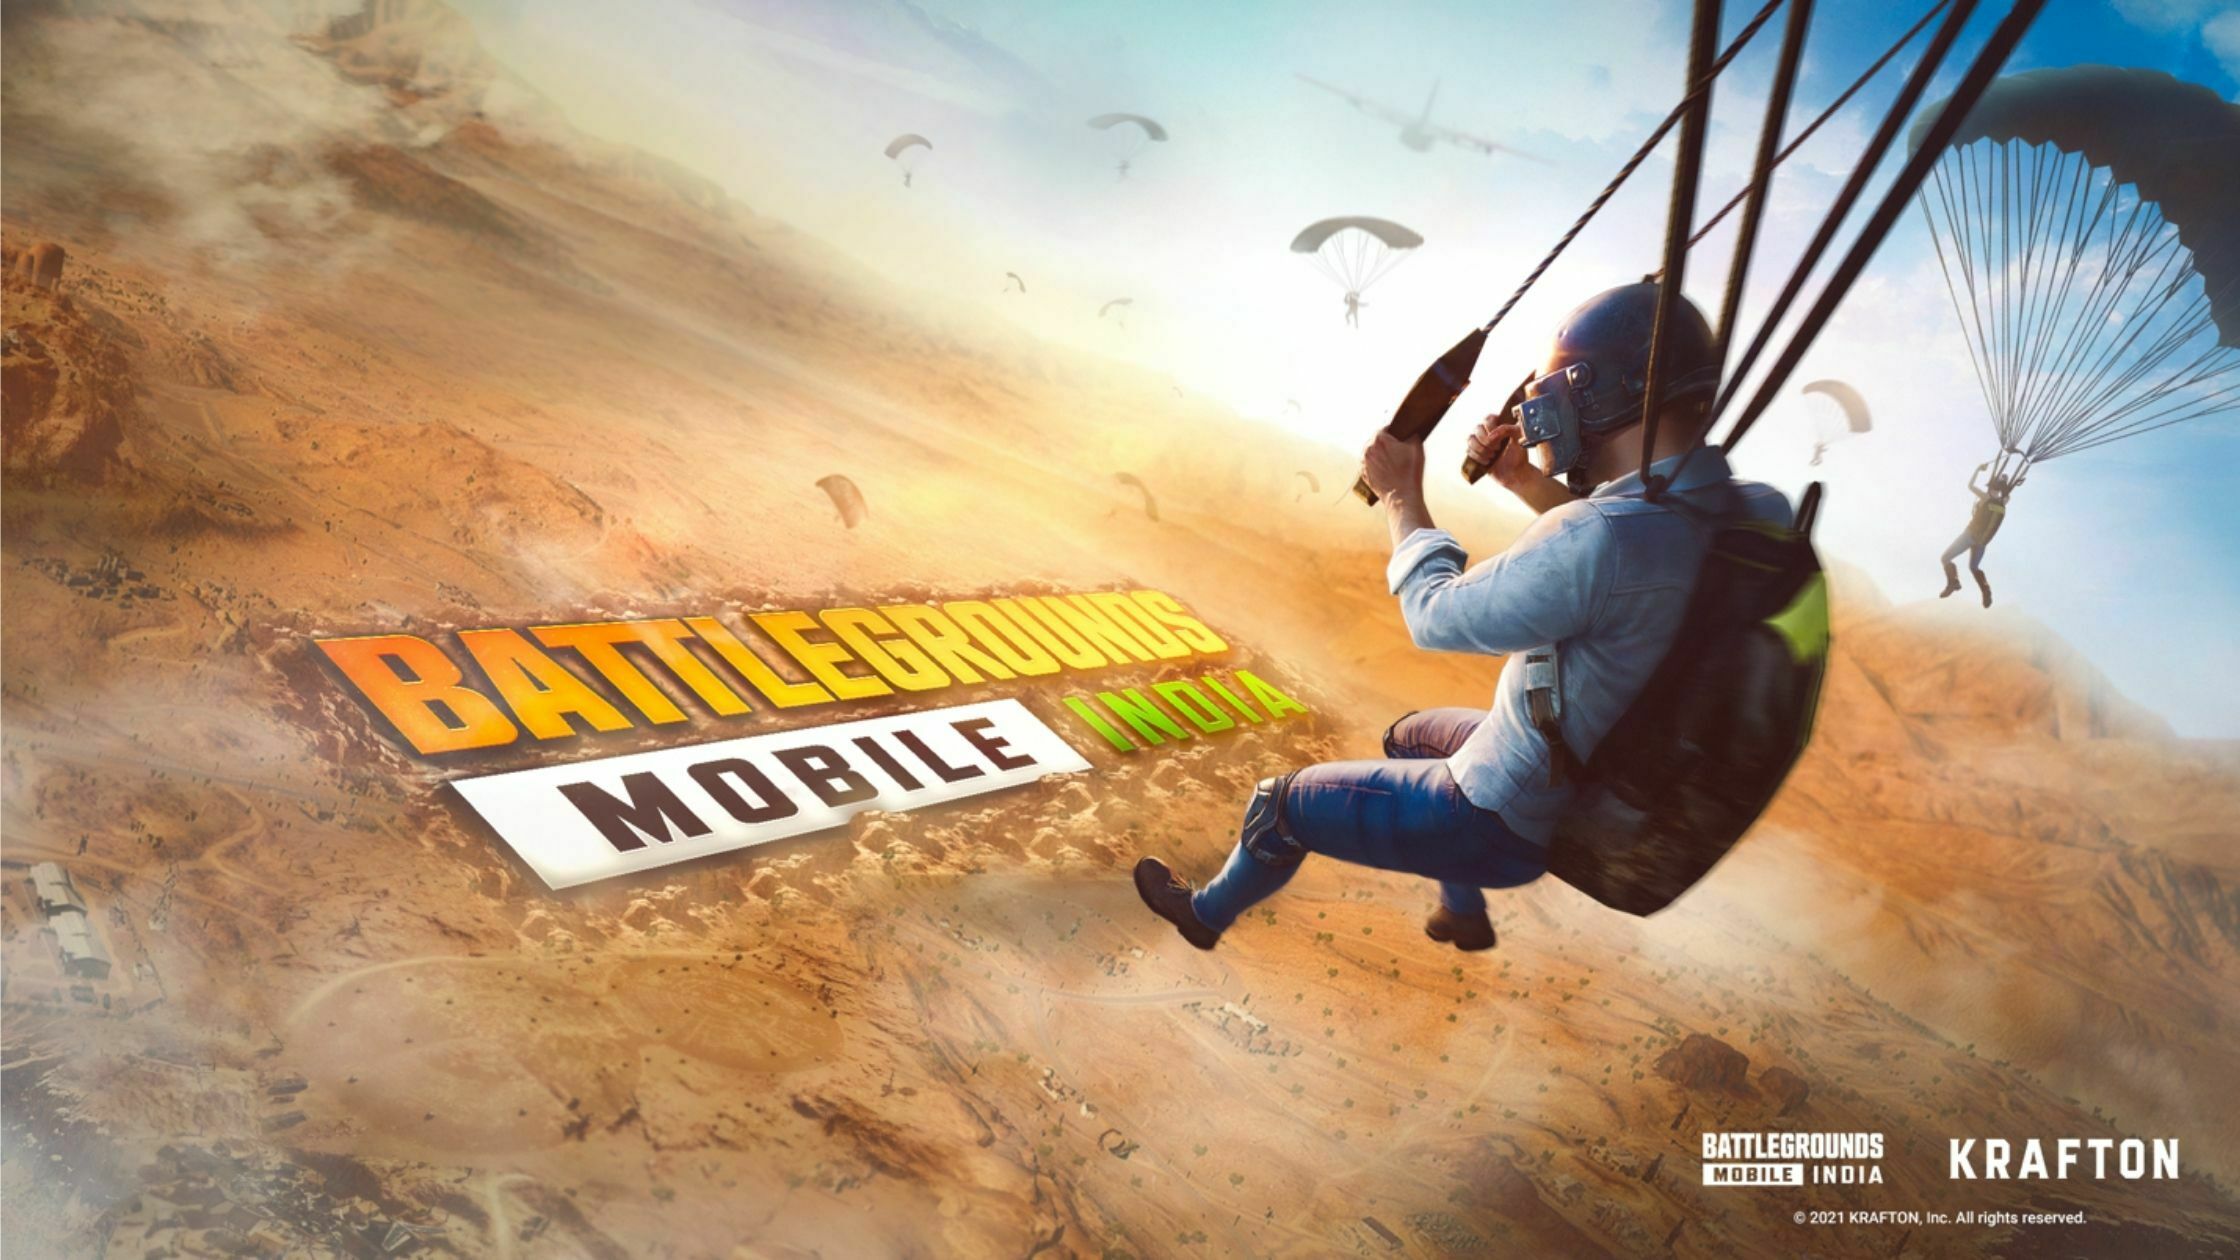 battlegrounds-mobile-india-official-website-has-been-launched